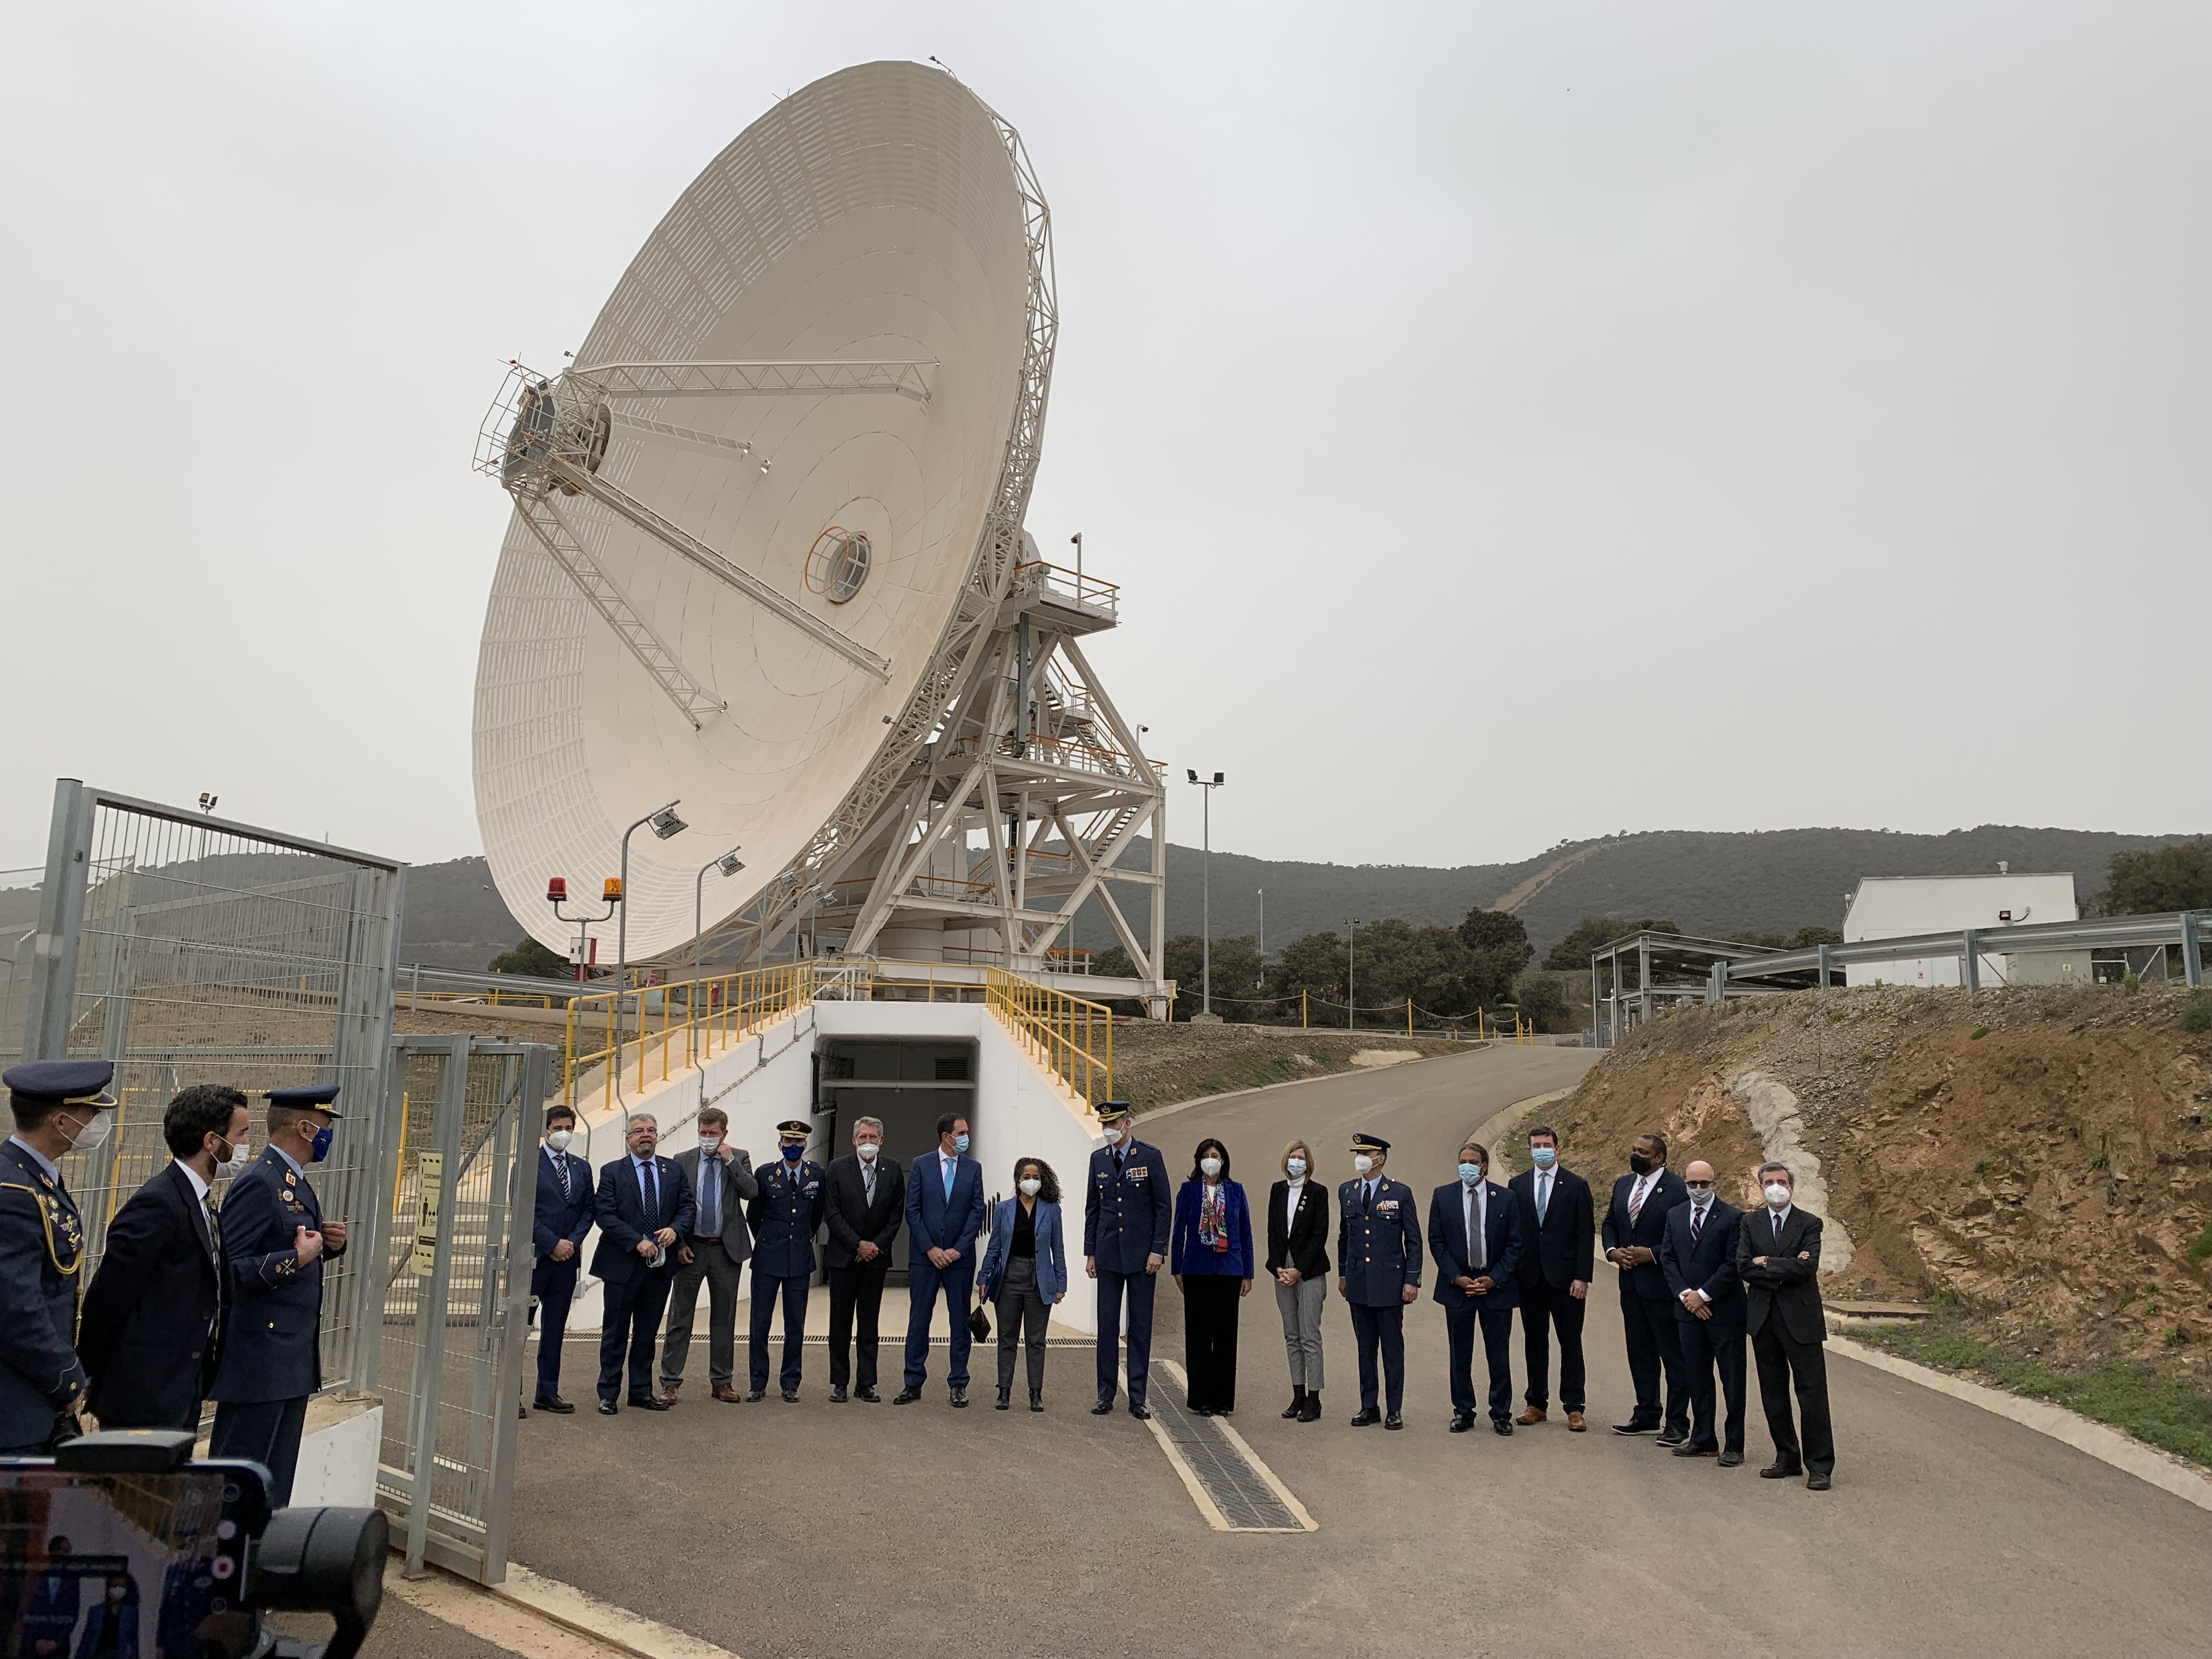 NASA officials and dignitaries from Spain and the U.S. flank King Felipe VI of Spain at the inauguration of the DSN’s DSS-53 antenna.